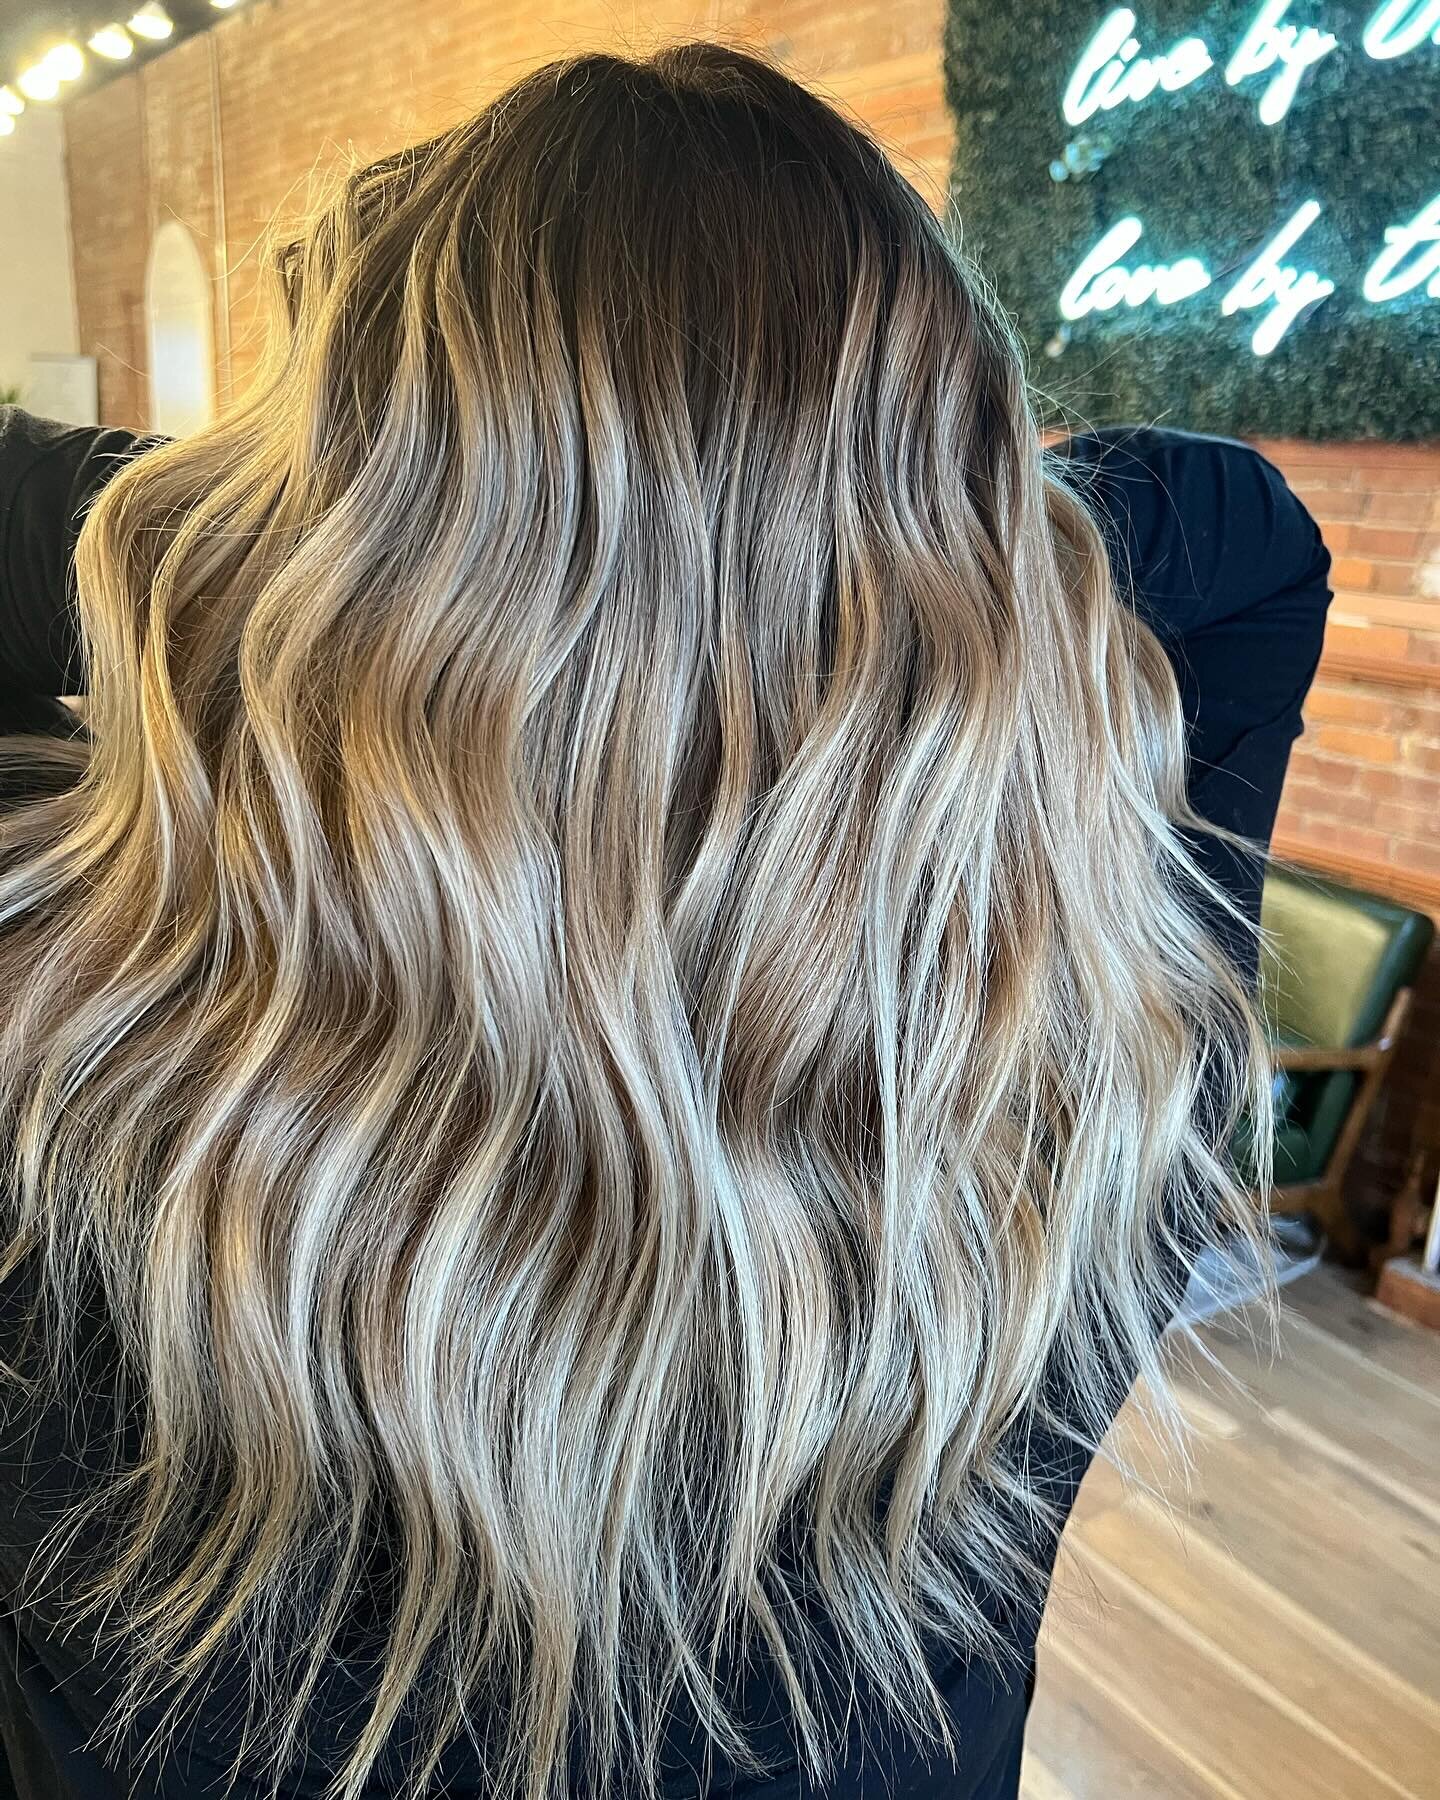 Canvas of color: Embracing the beauty of painted balayage for a personalized touch that speaks volumes. 🎨  Hair by: @amanda_latuabellahair  #BalayageArtistry#paintedbalayage#haircolorist#balayage